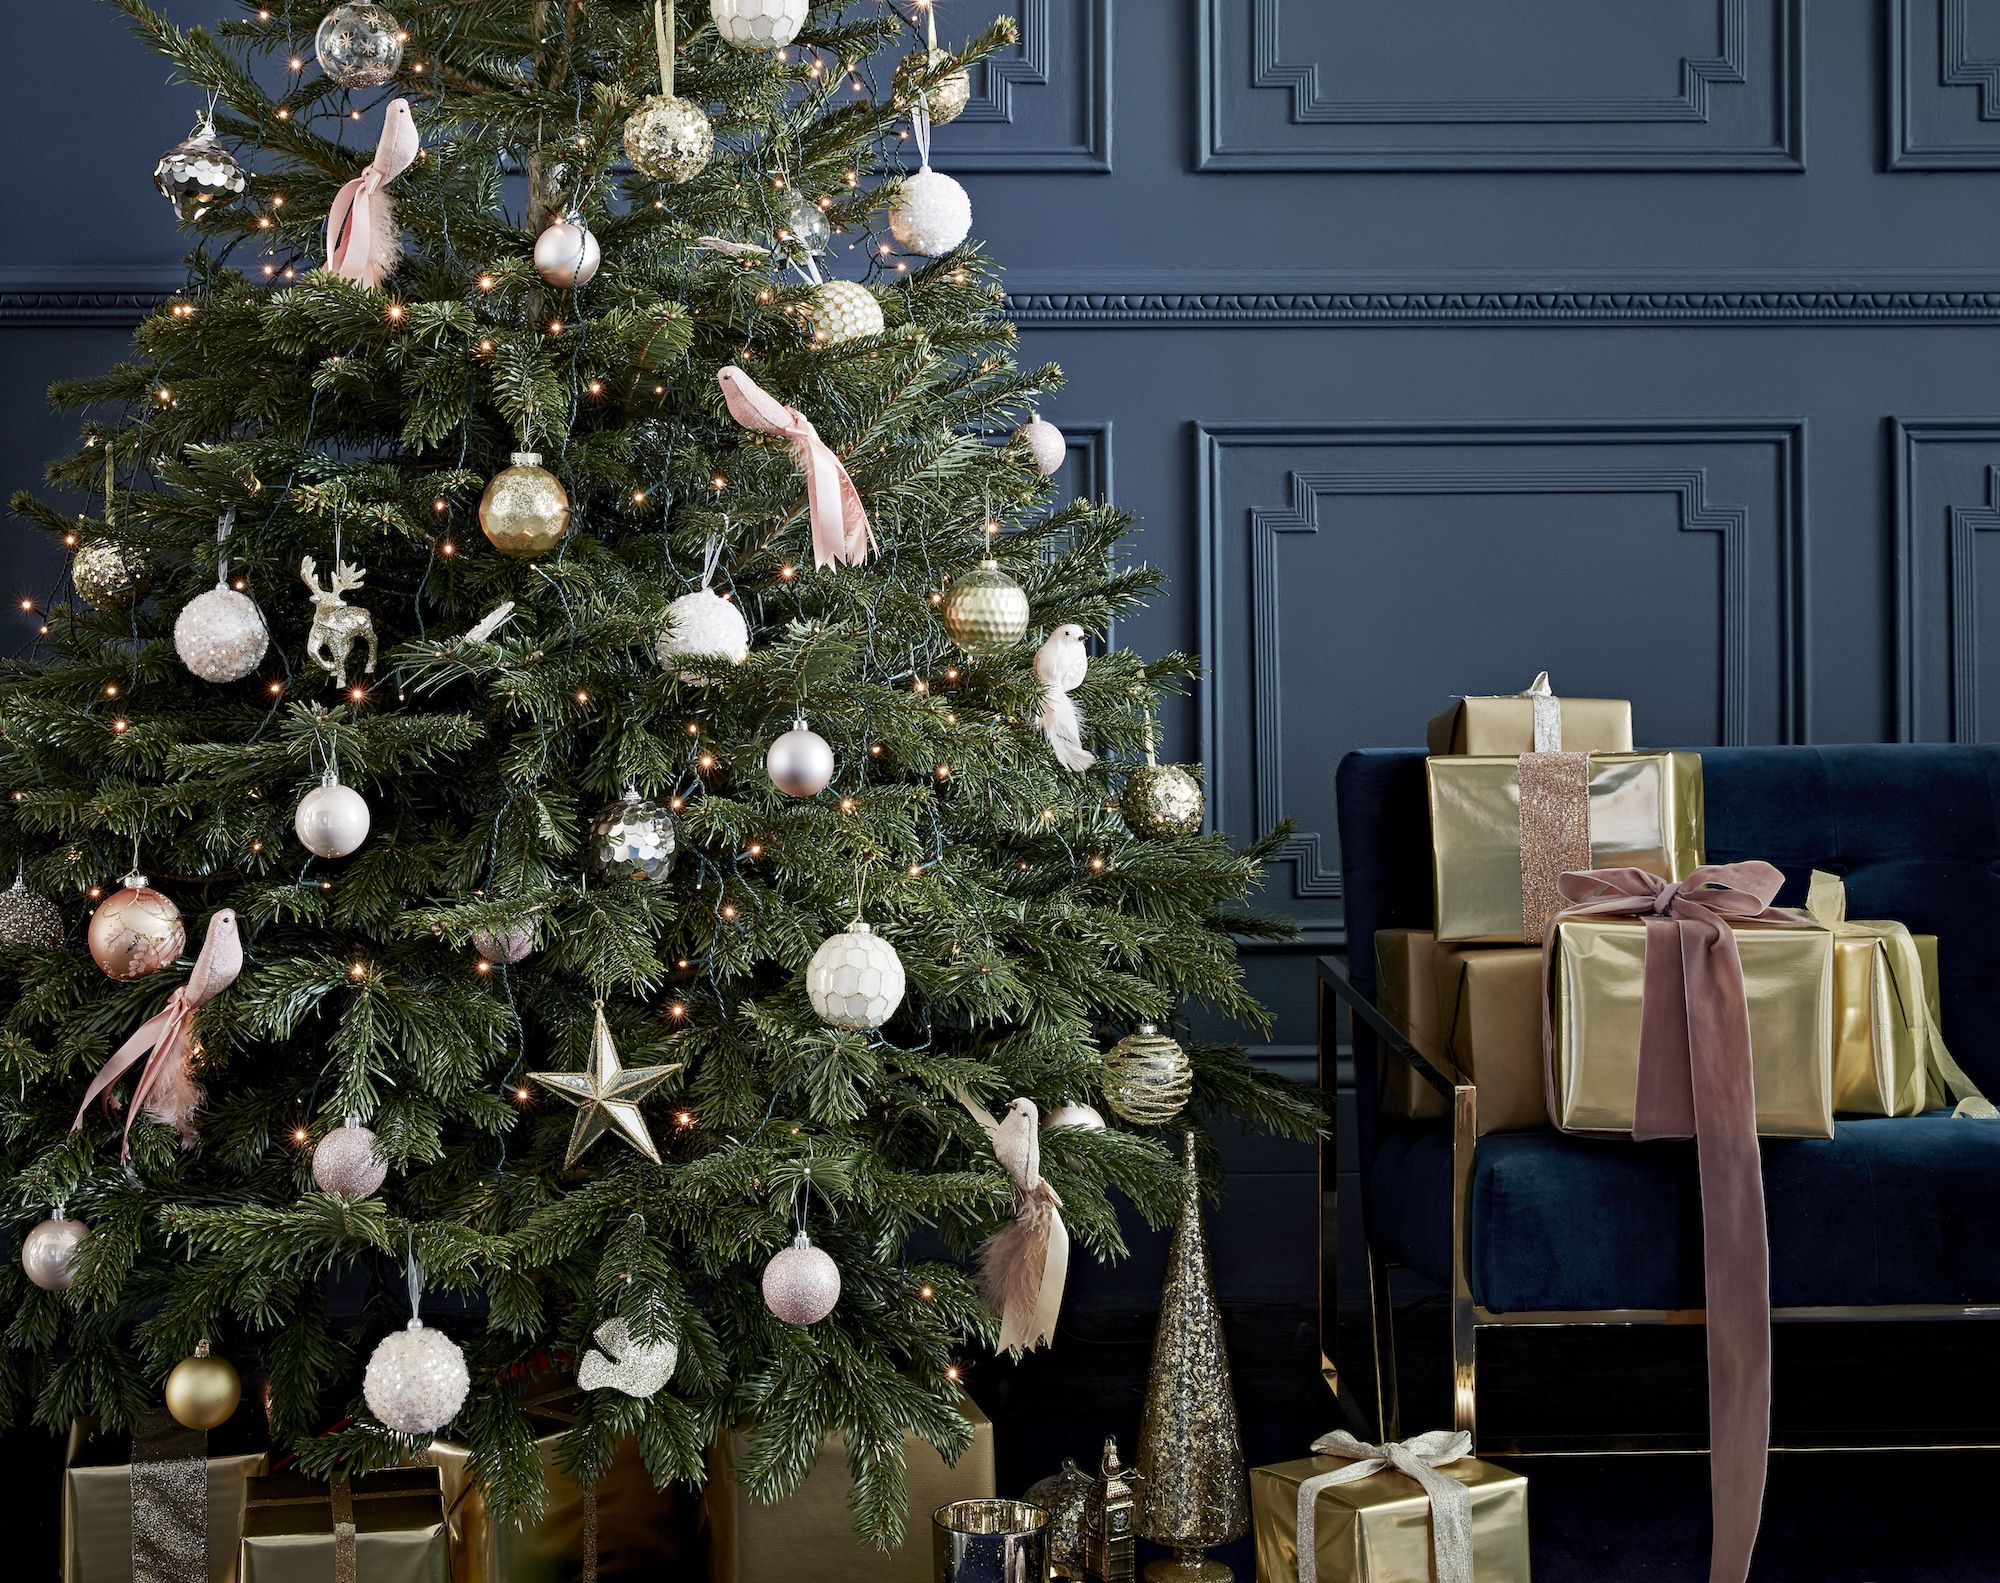 When Should You Buy A Real Christmas Tree?